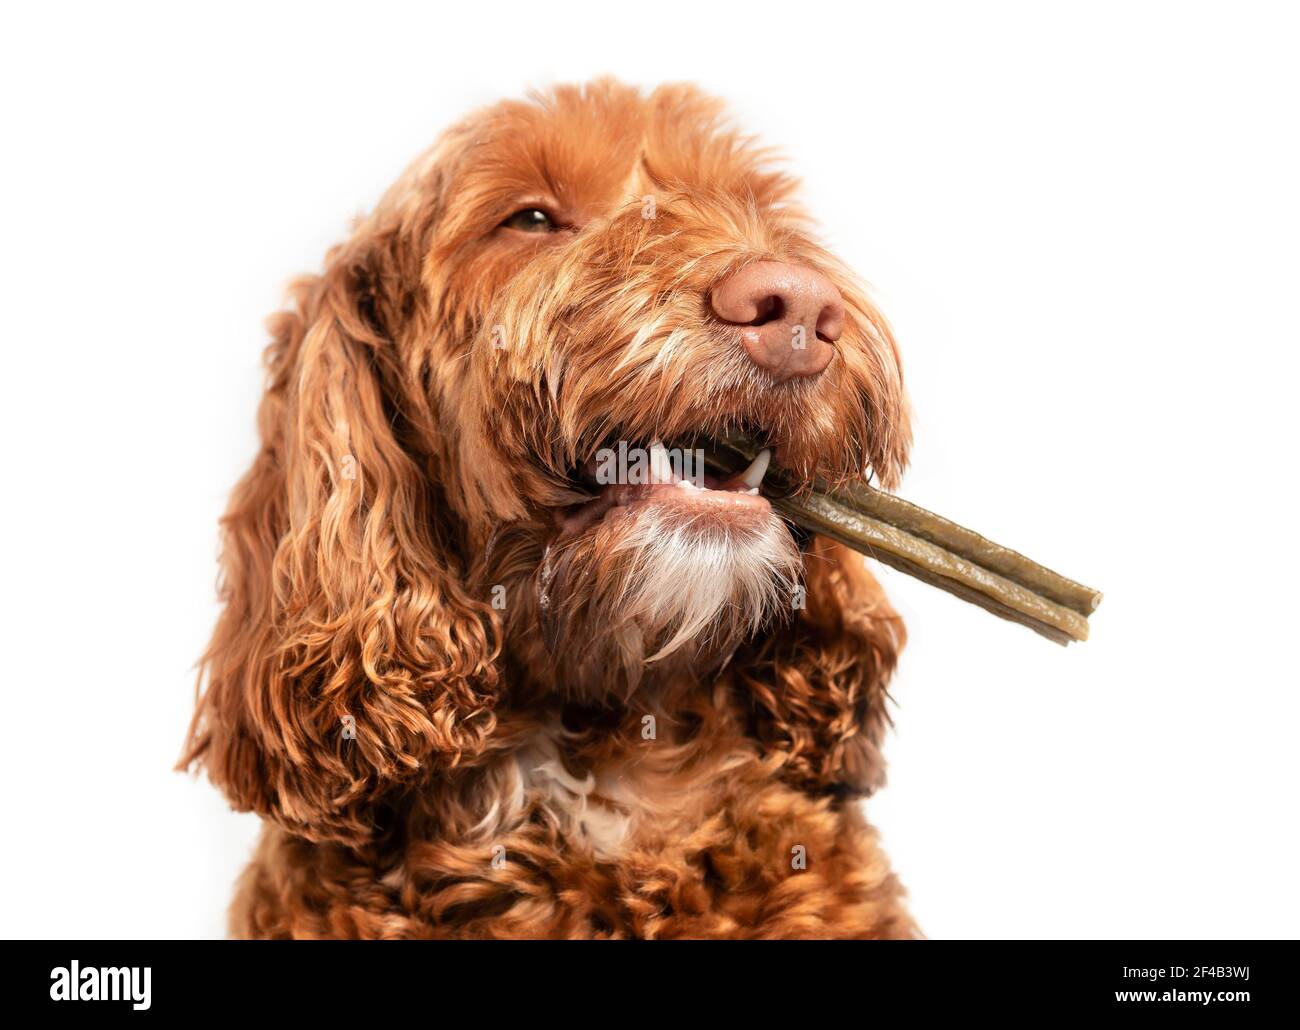 Dog with dental chew bone in mouth. Happy  Labradoodle dog with long stick to the side, like a cigarette. White teeth an fangs visible. Concept for de Stock Photo